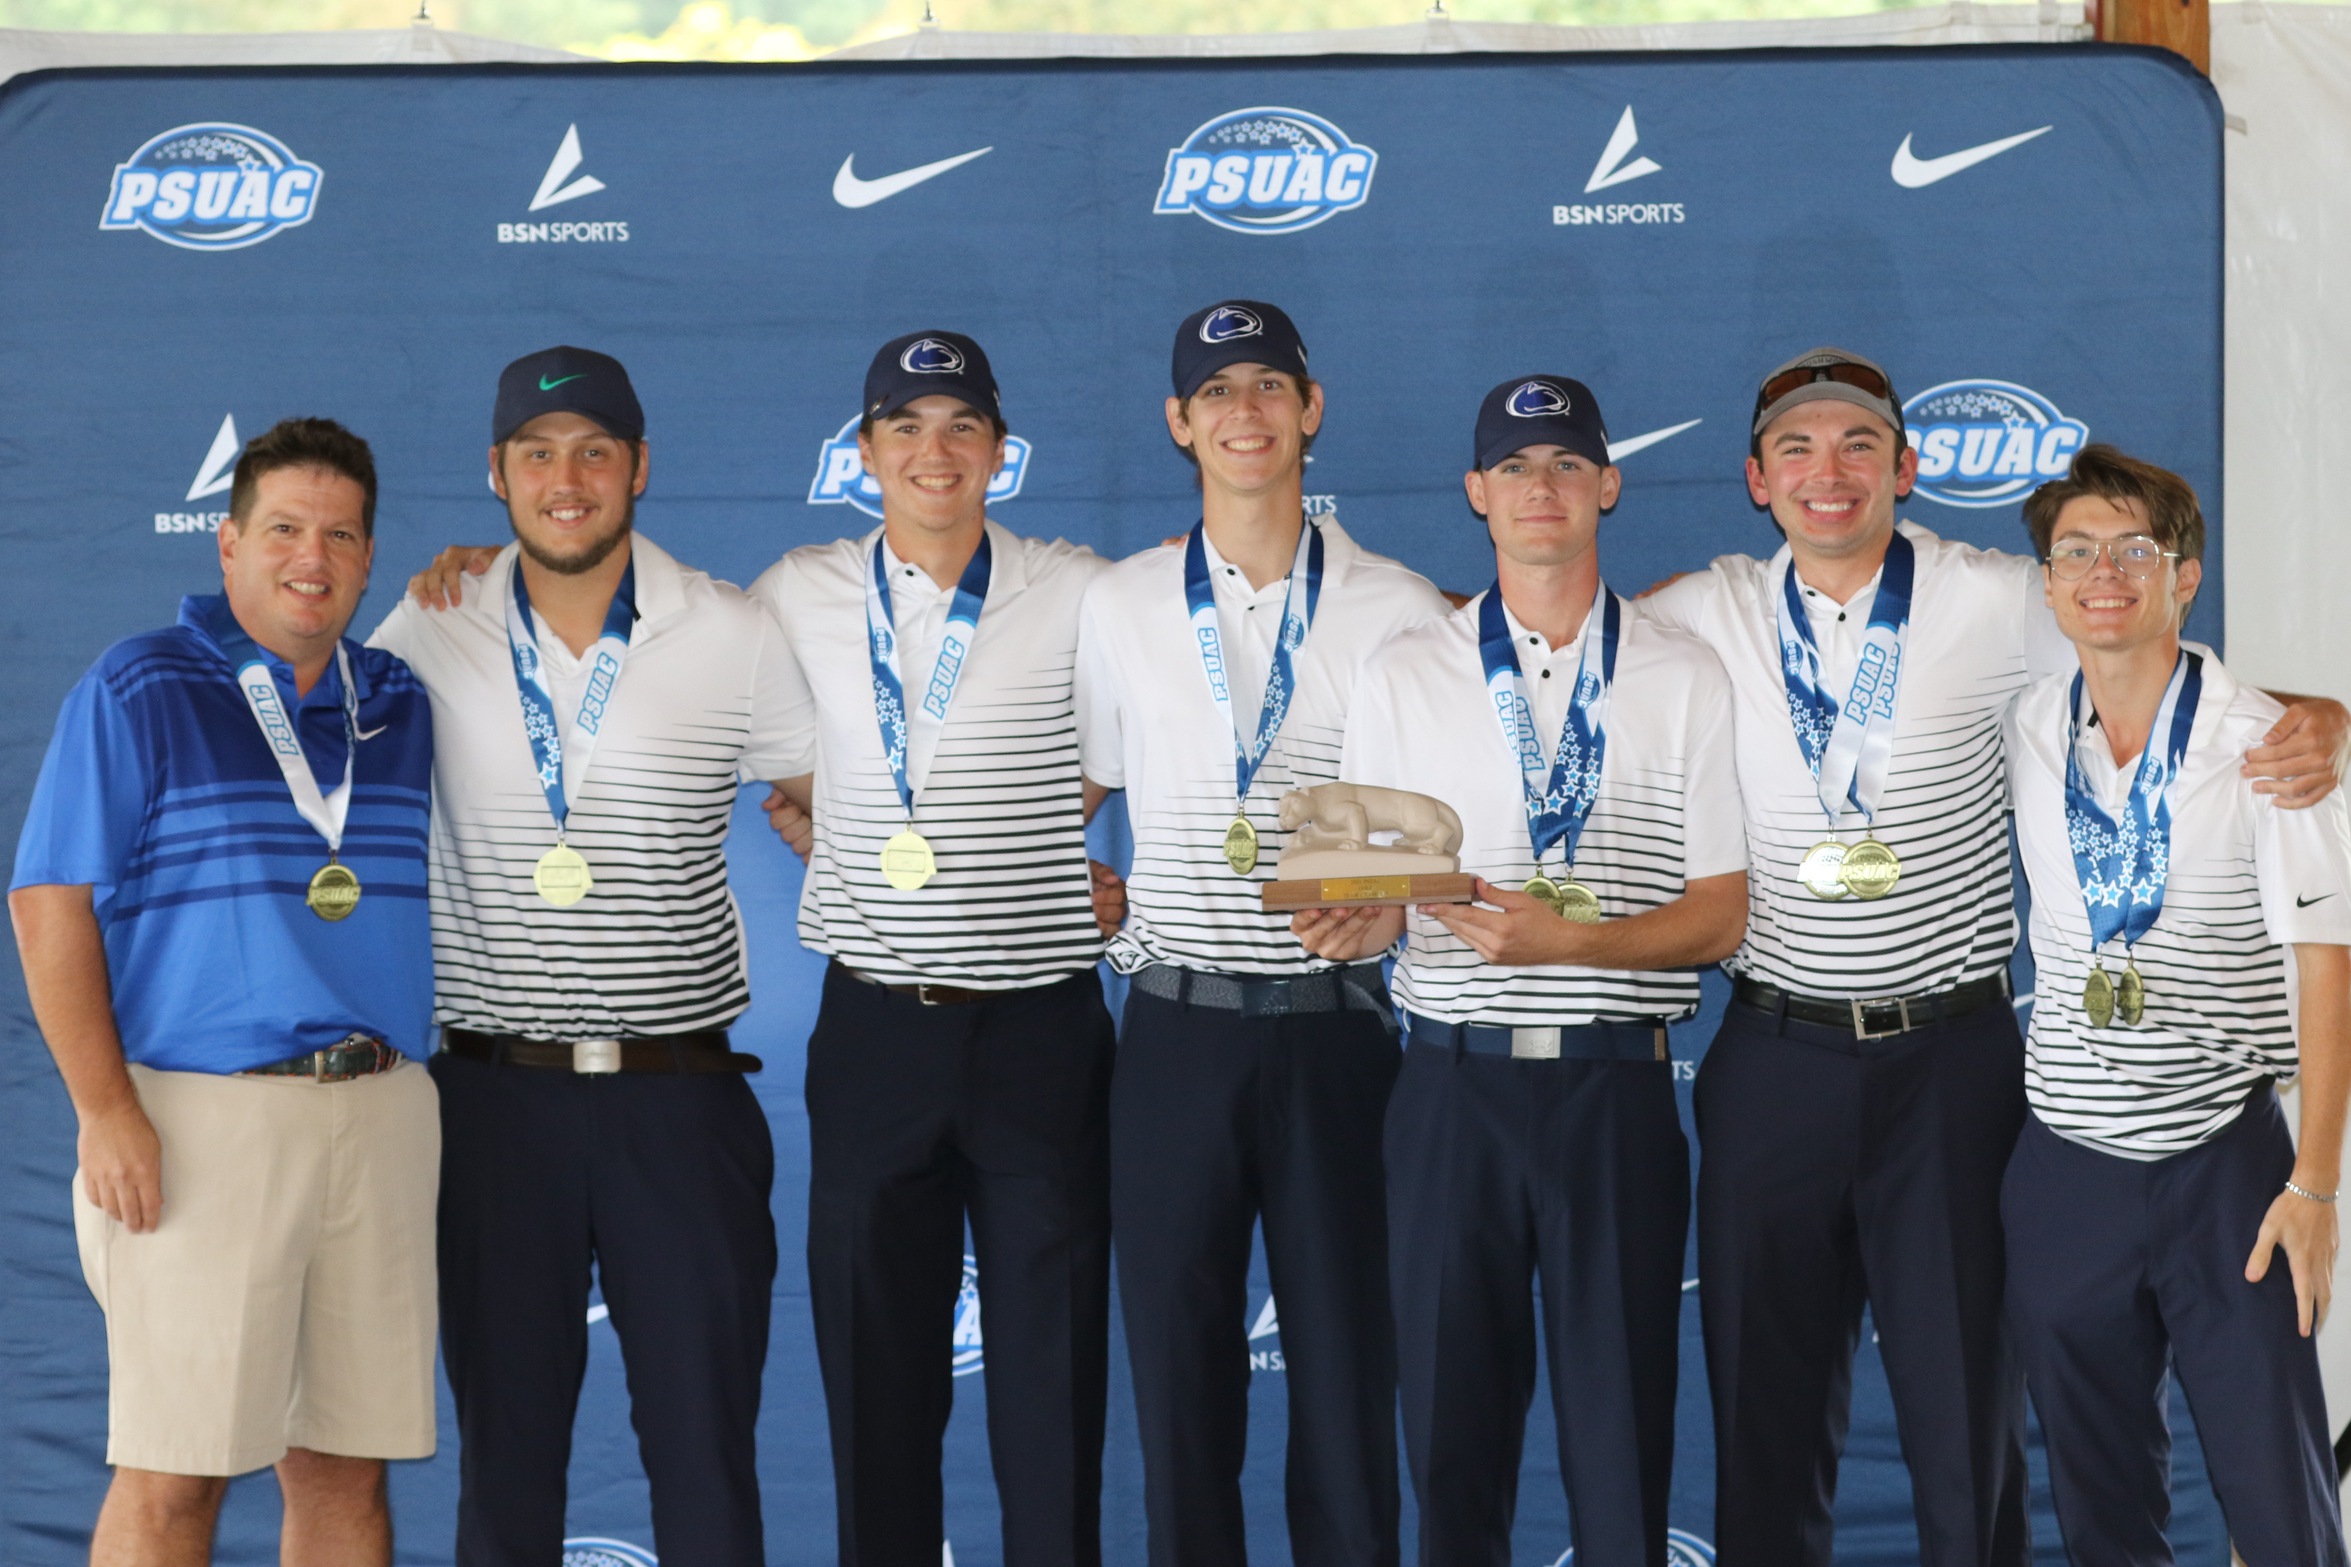 The Penn State Hazleton golf team poses for a photo after winning the 2021 PSUAC Golf Championship.